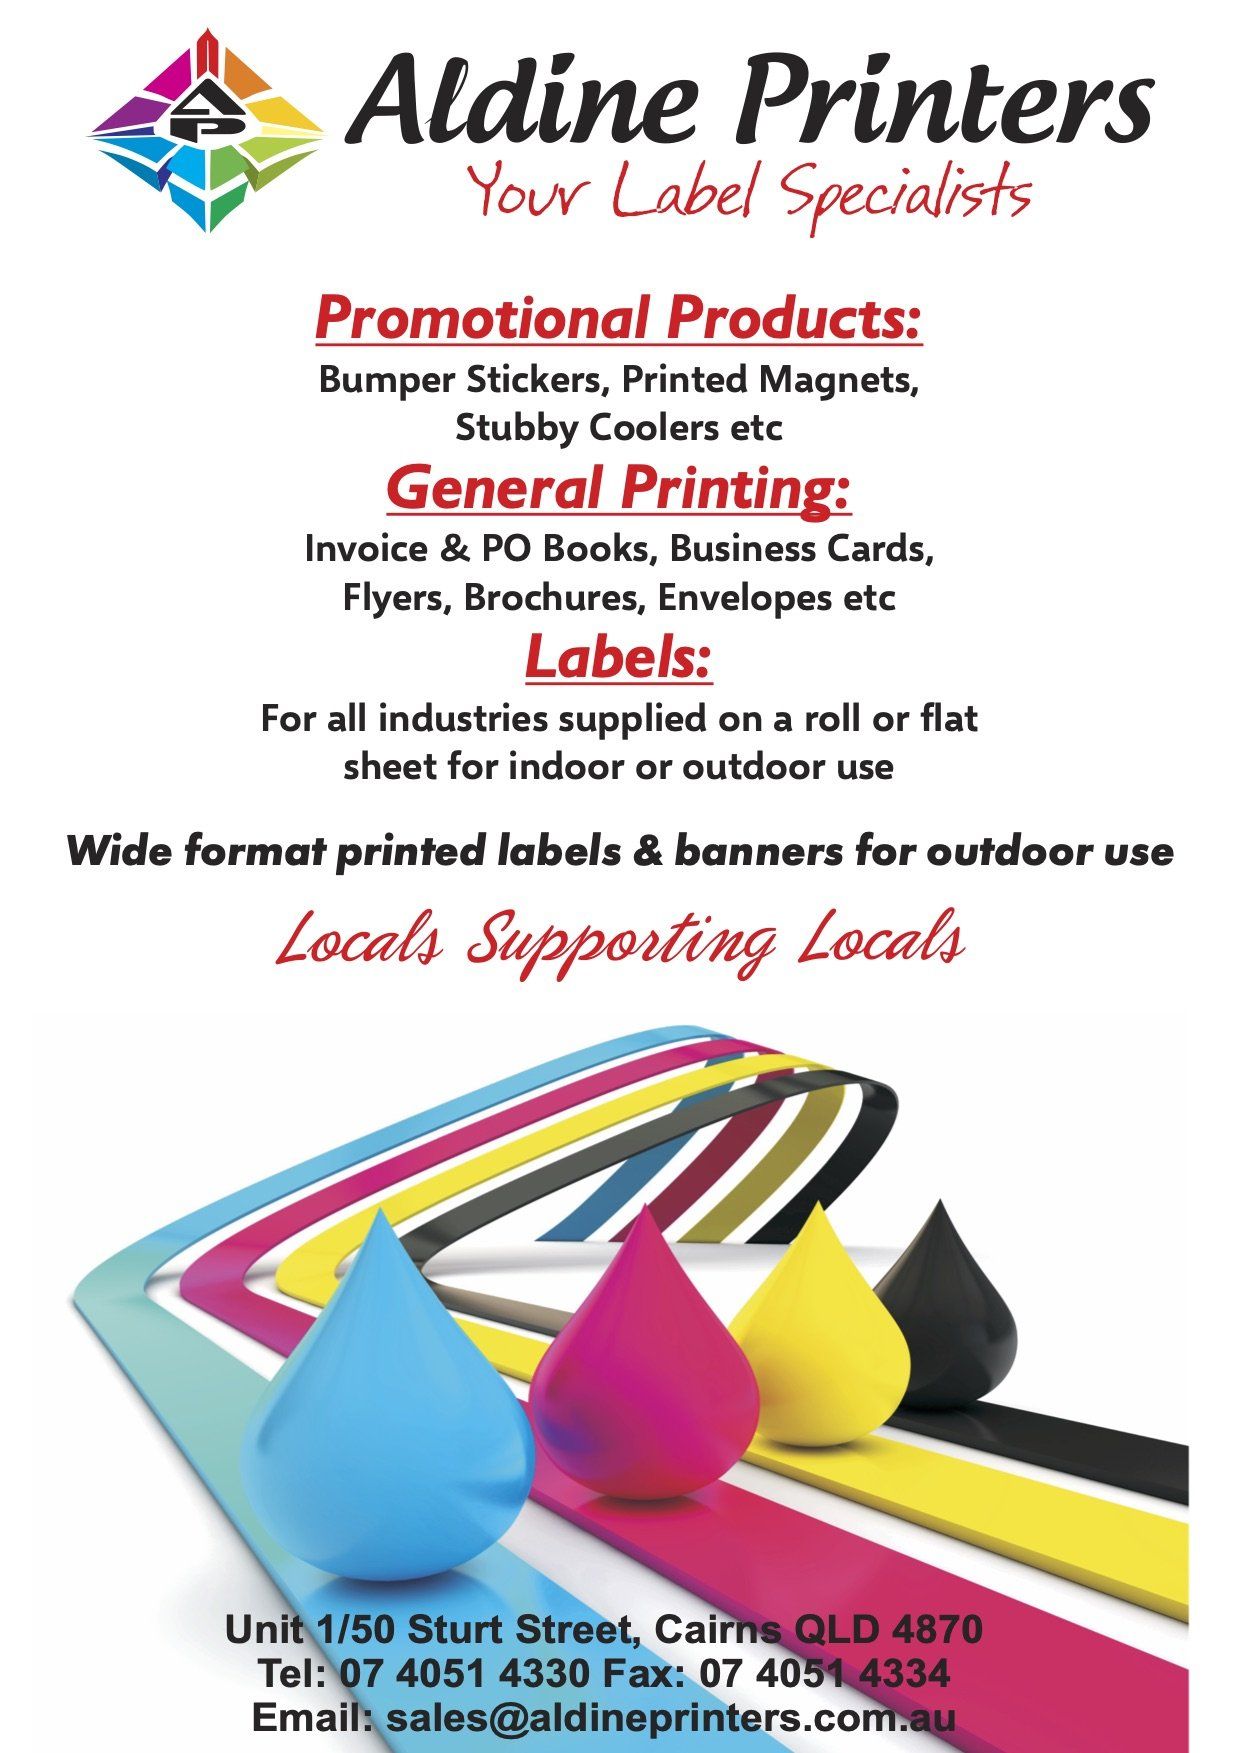 Aldine Printers - Promotional Products, General Printing, Labels